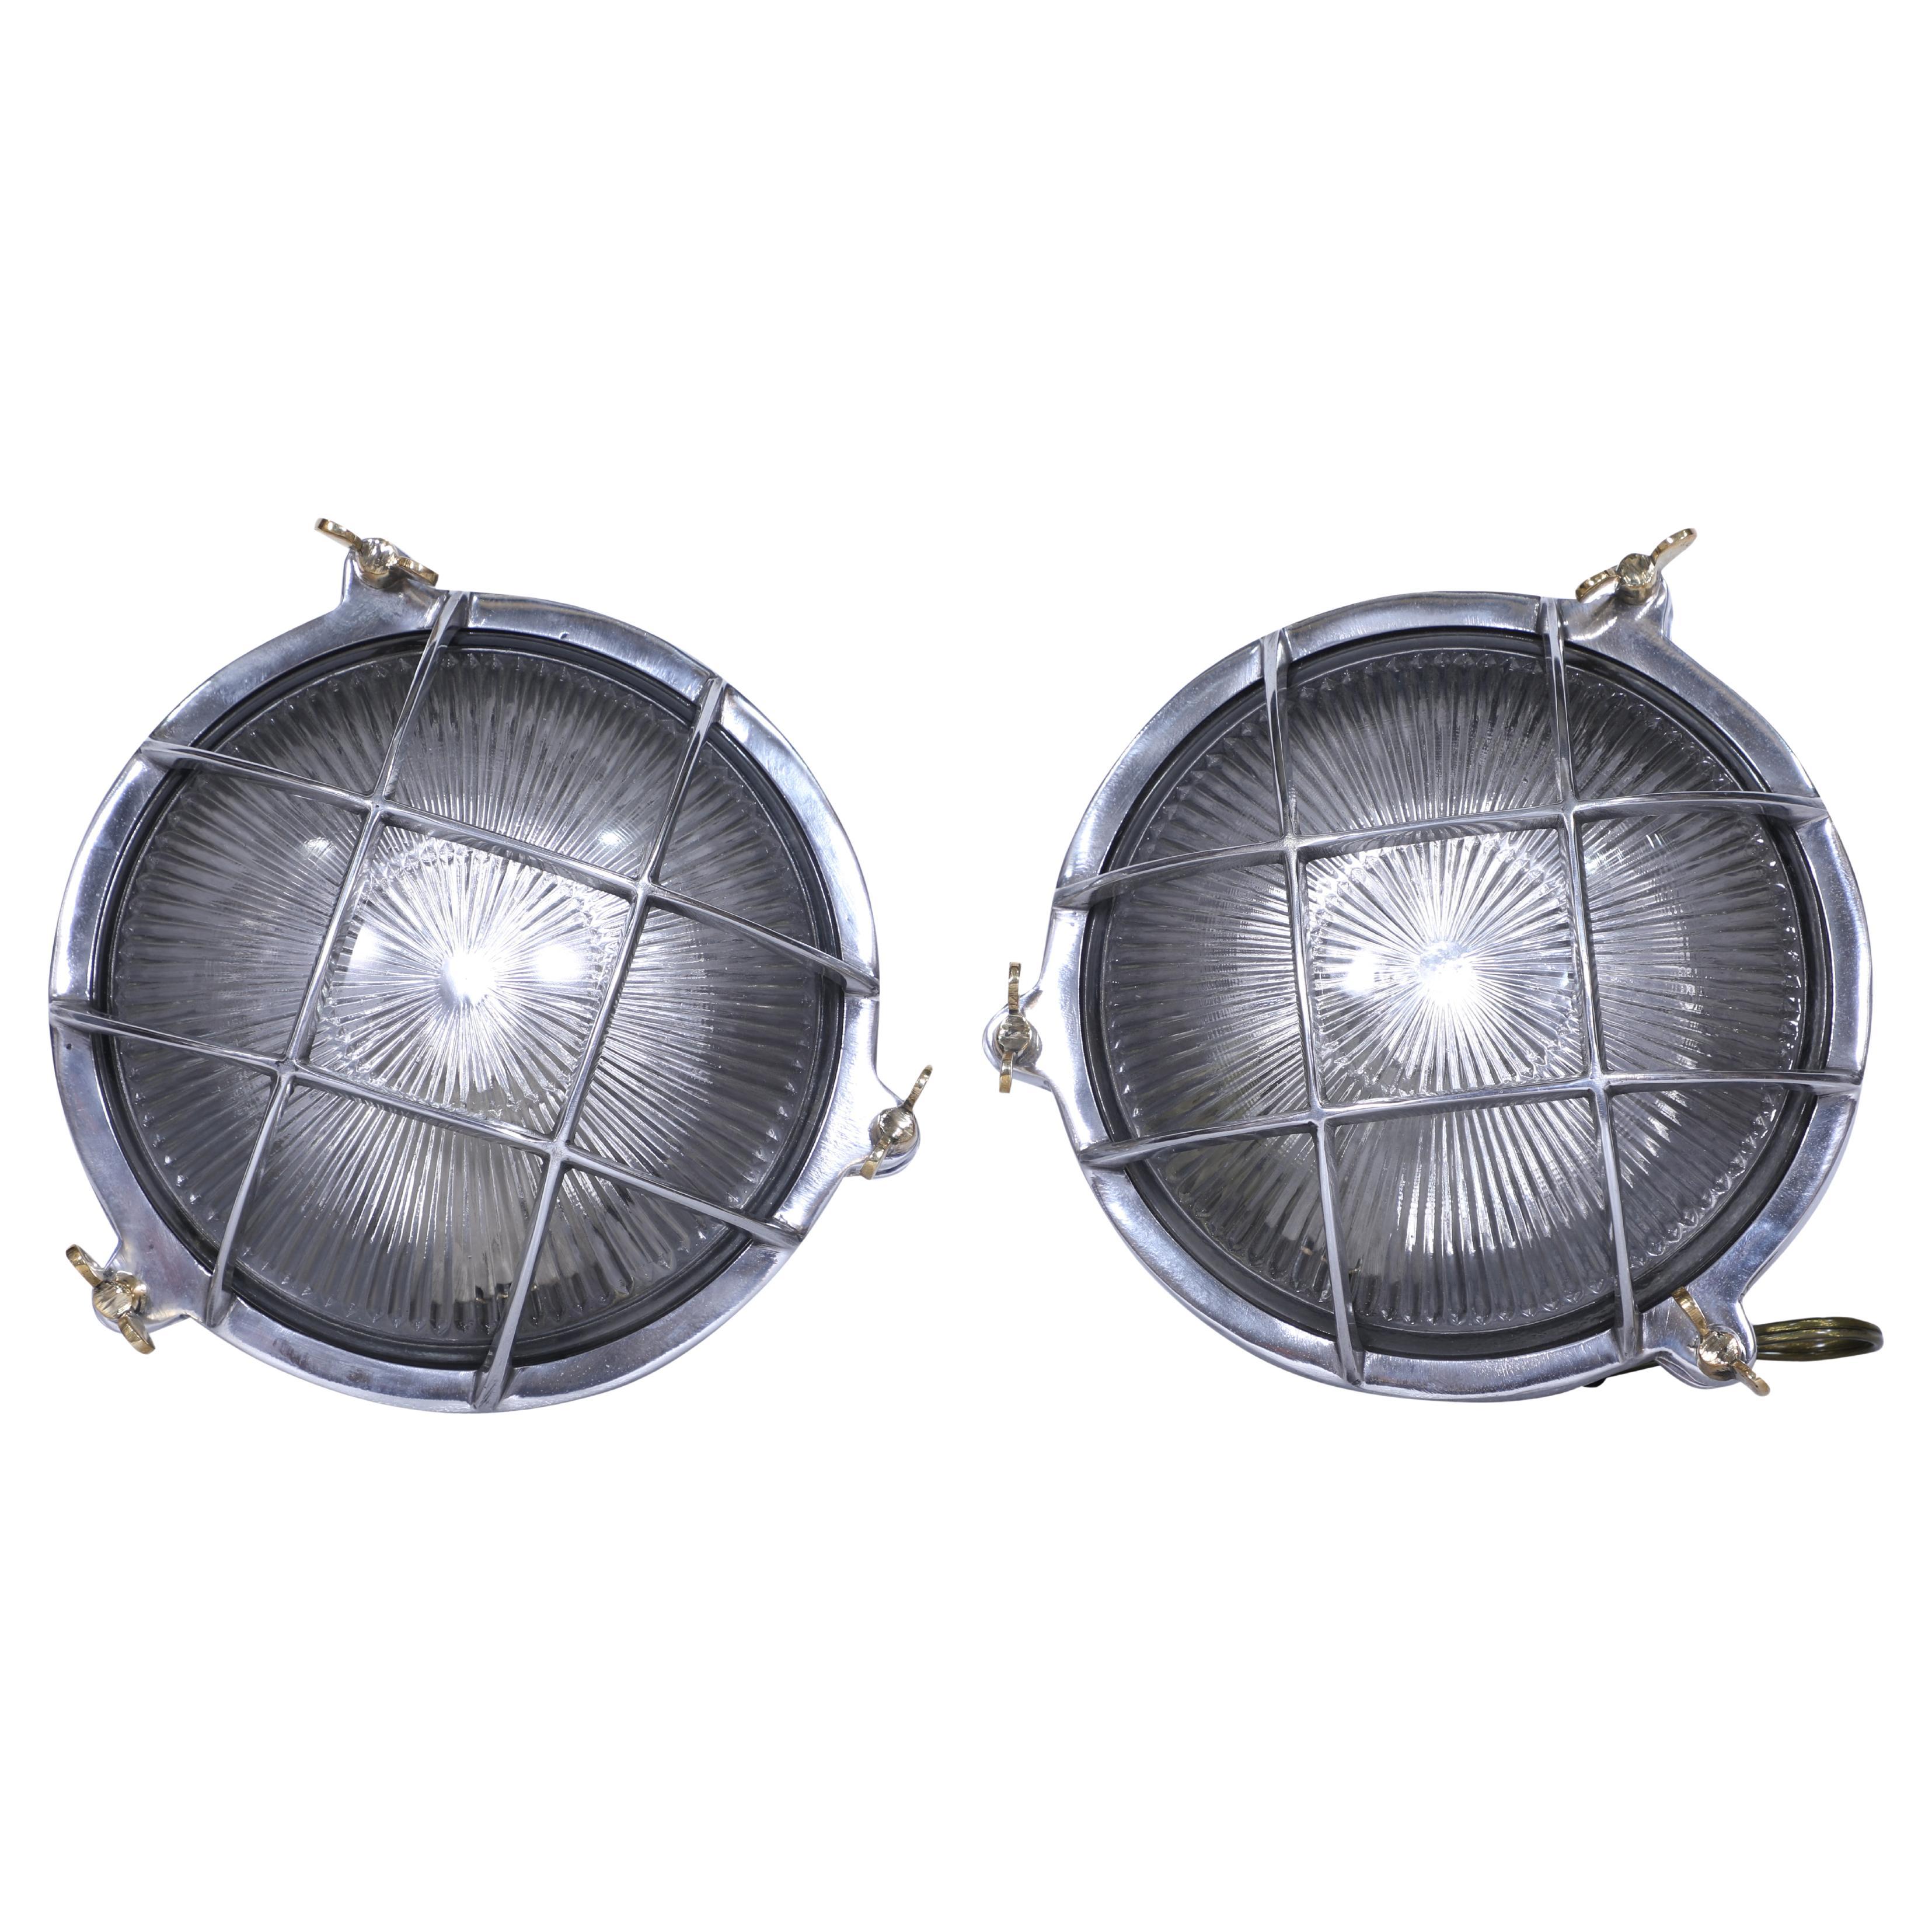 Pair of Chrome and Textured Glass Ship's Passageway Nautical Wall Lights For Sale